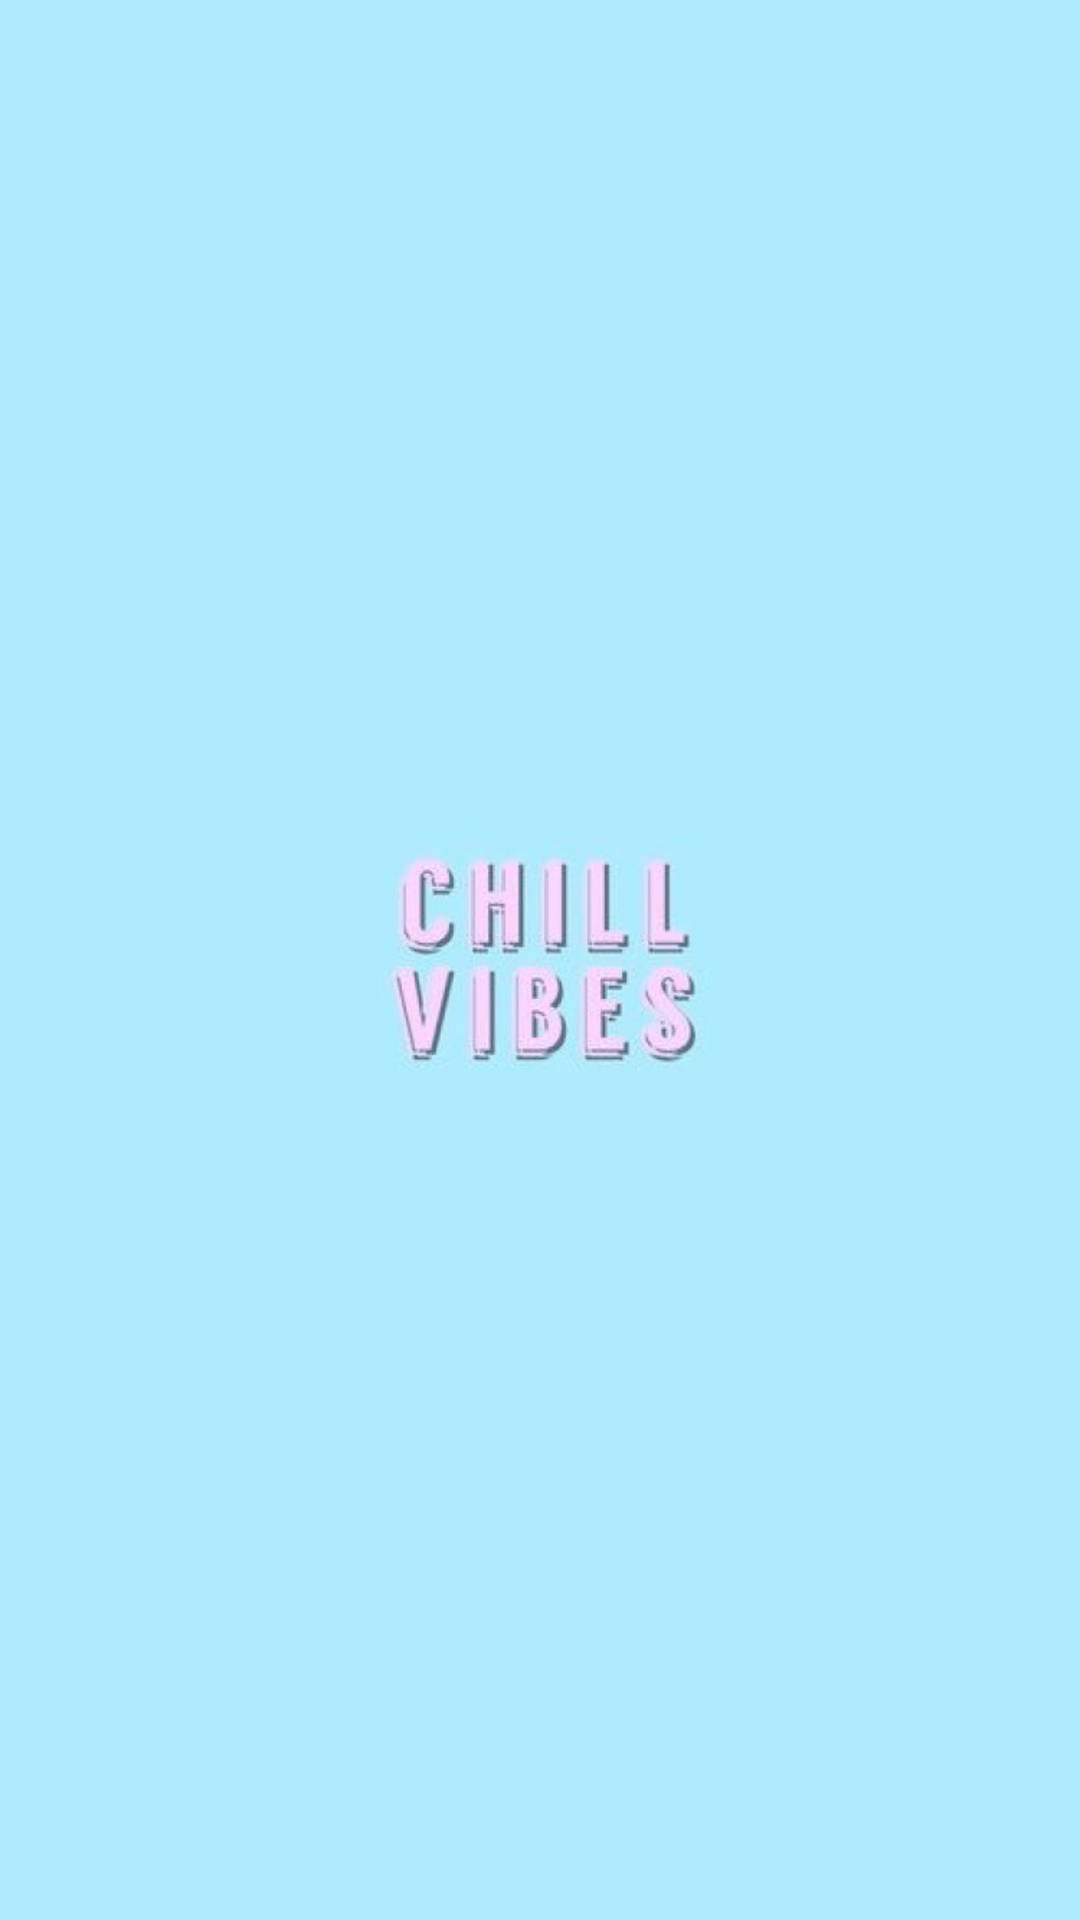 Cute Chill Vibes Wallpaper